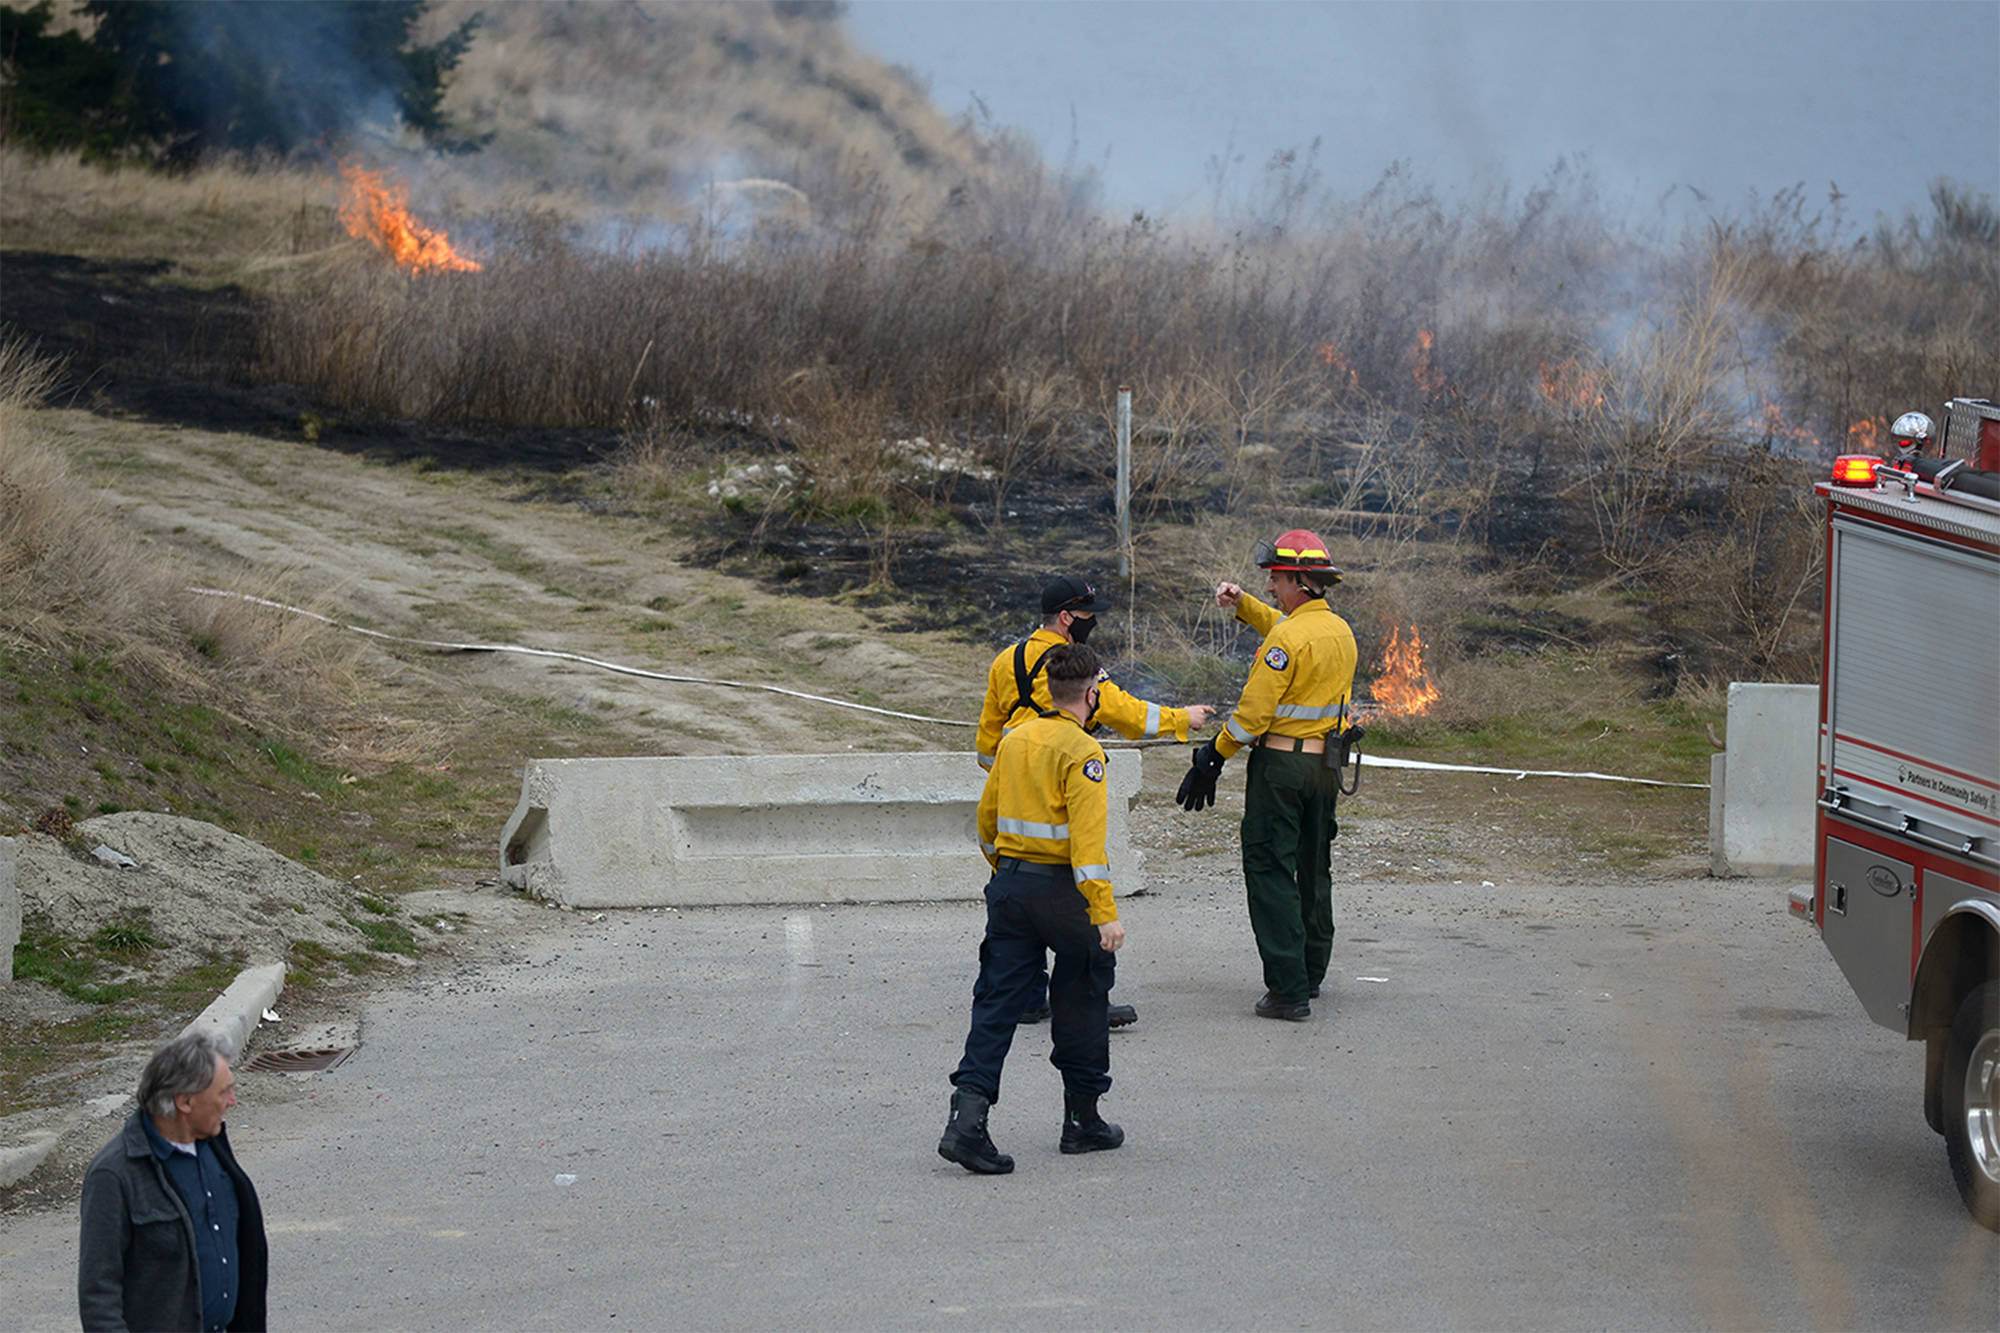 West Kelowna fire crews snuffed out patches of flame that ignited on the side of Highway 97 near the west side of William R. Bennett Bridge Saturday, March 20, 2021. (Phil McLachlan - Capital News)